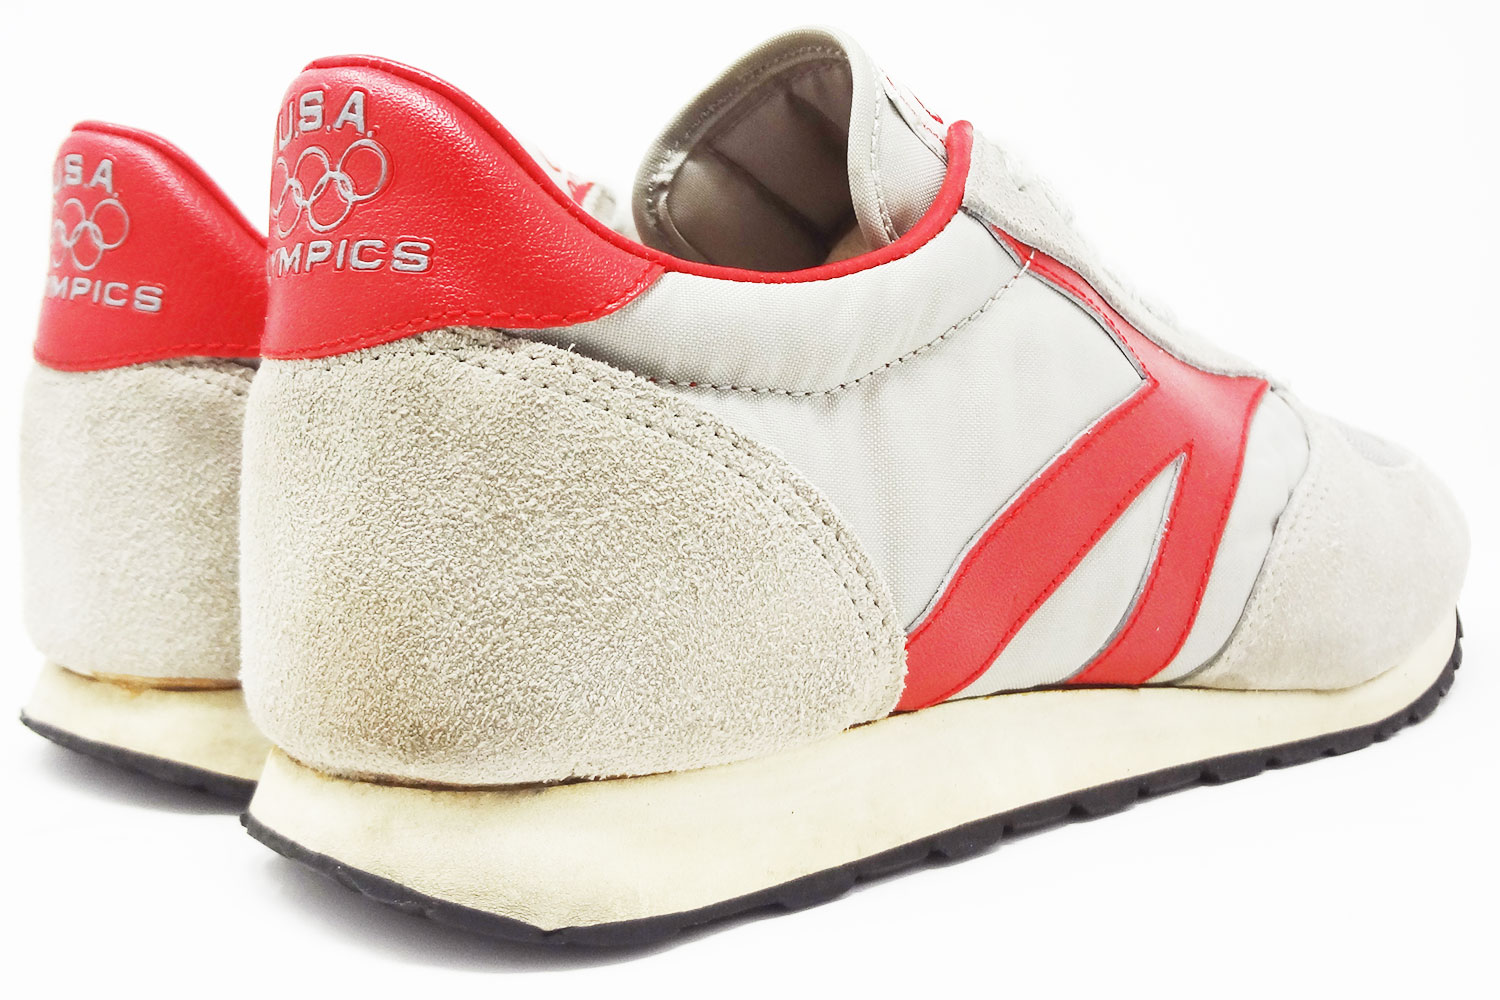 Old school 1980s JCP USA Olympics vintage sneakers rear @ The Deffest